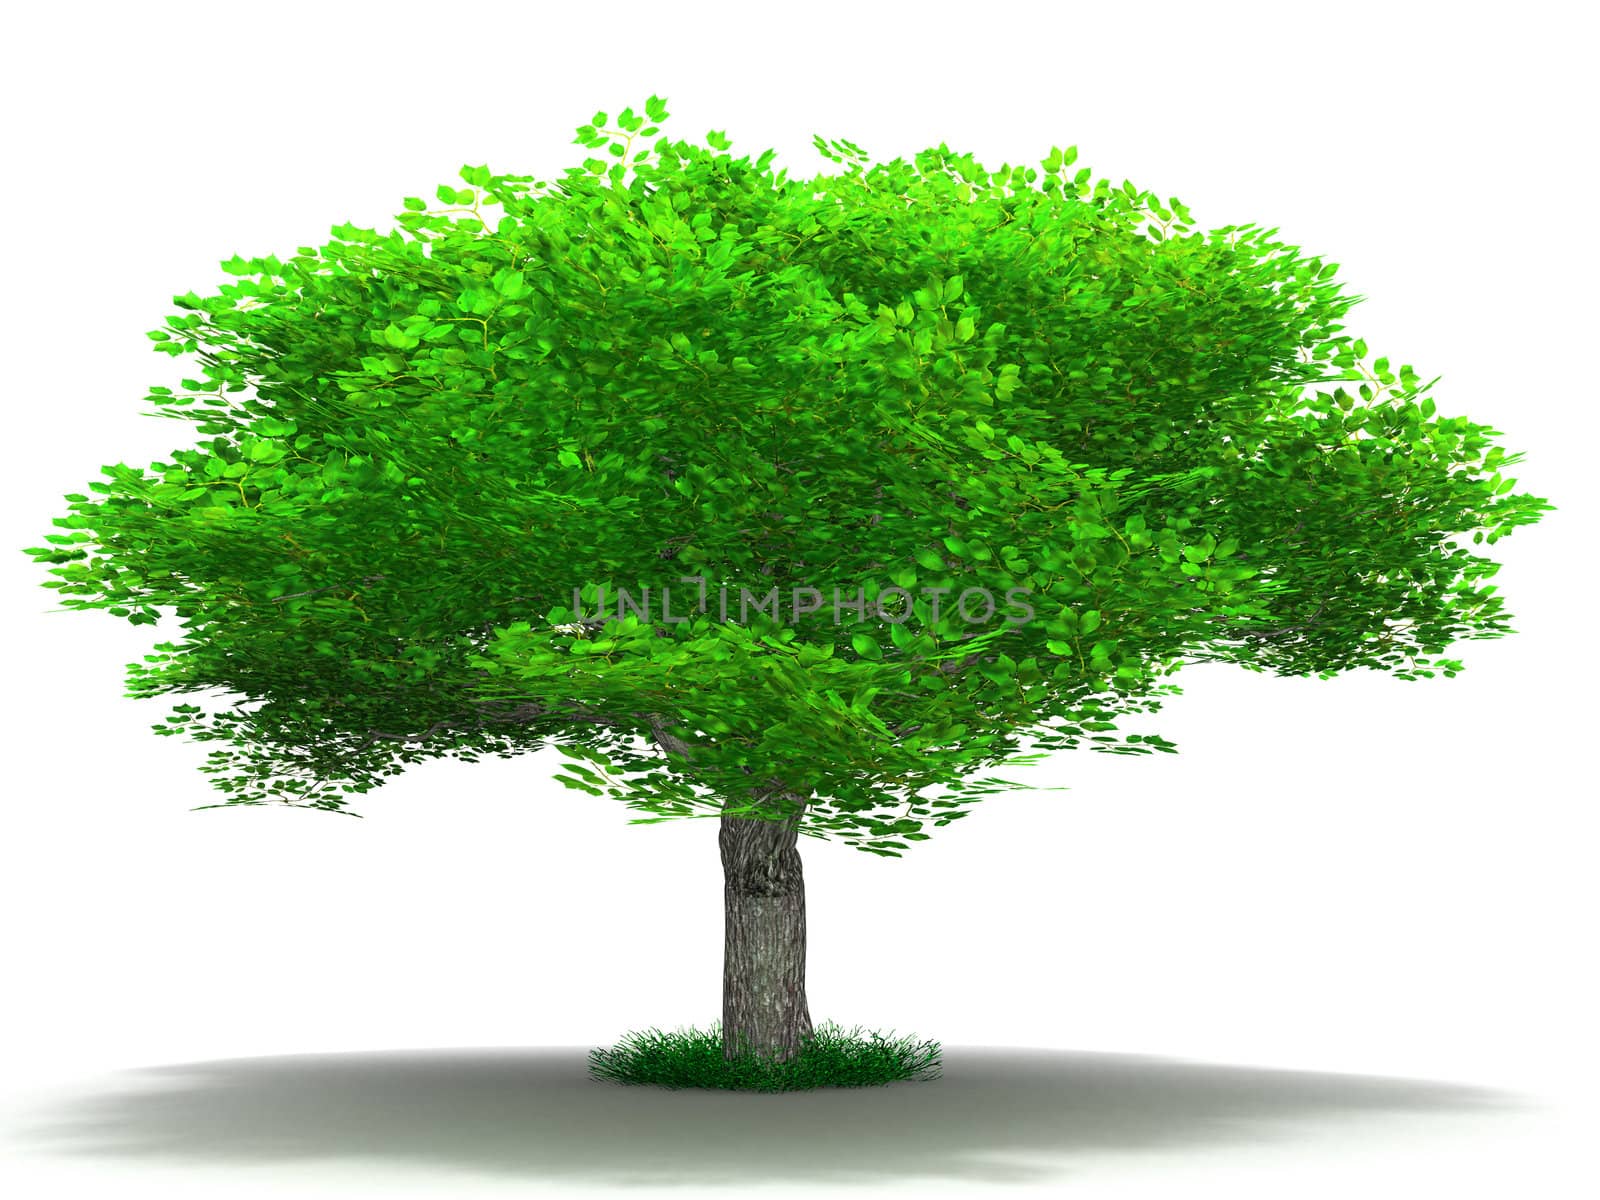 single tree on a white background in a summer season